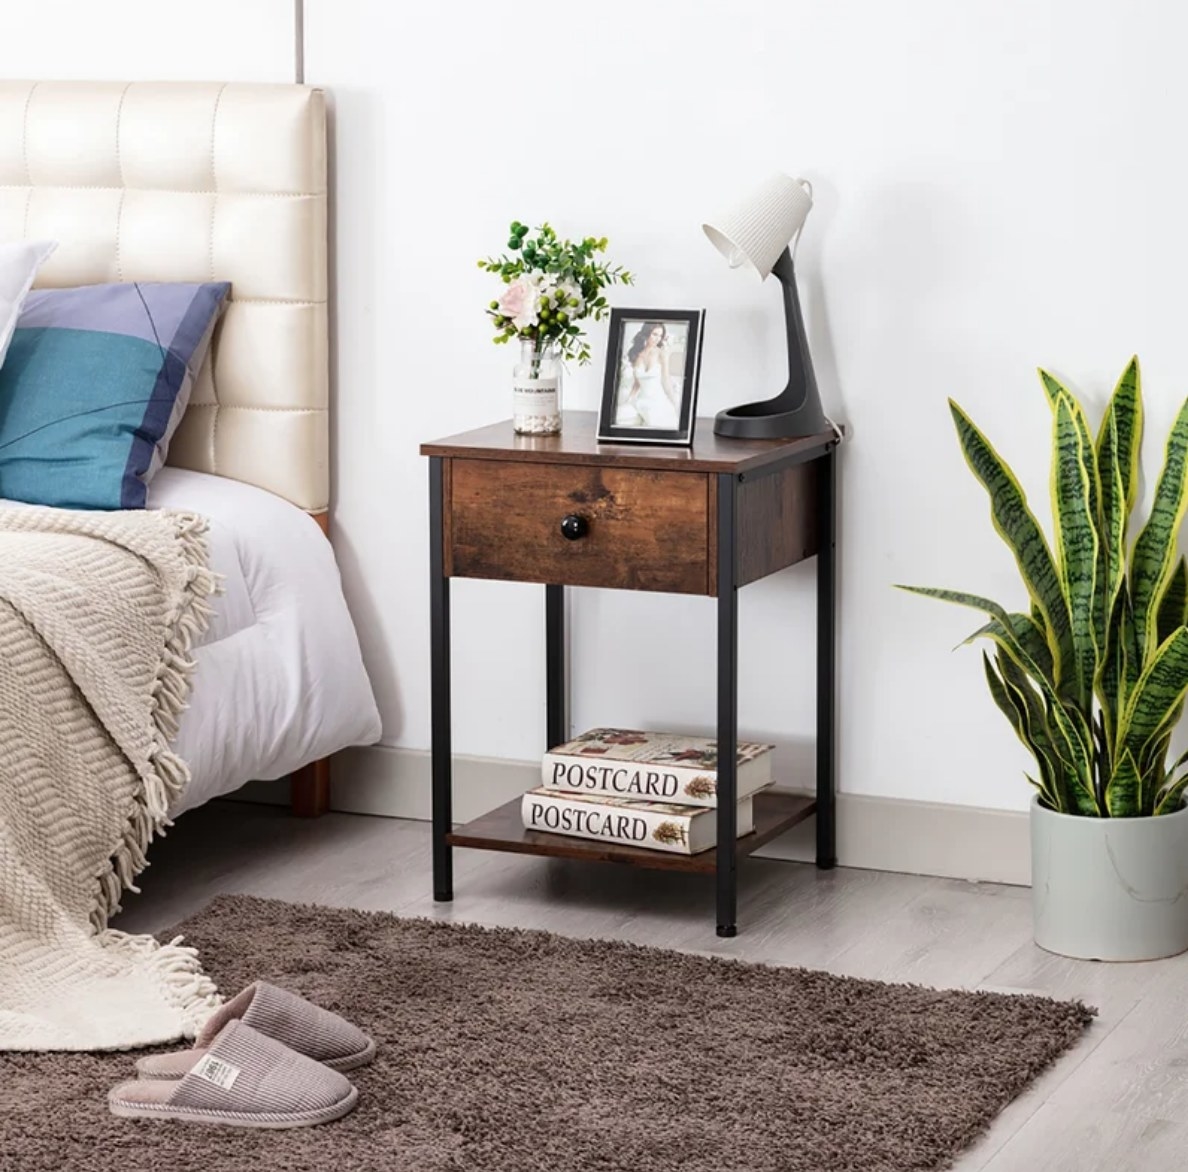 Wooden bedside table with lamp, picture frame, flowers on top, midde drawer, and books on bottom shelf